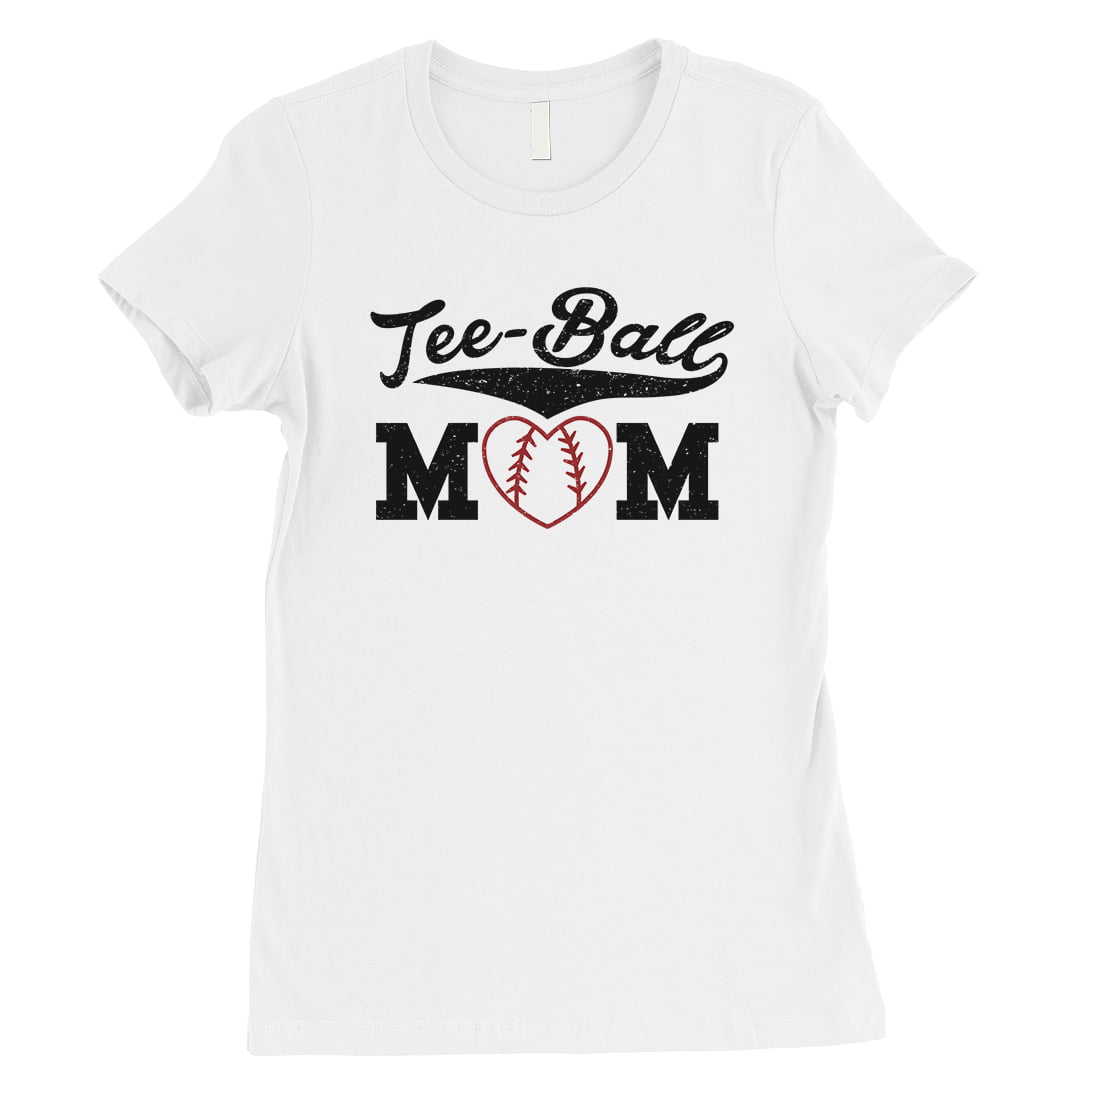 Funny Mothers Day Gift Mom Heart Tshirt Best Gifts Idea for Women Premium Quality Shirt